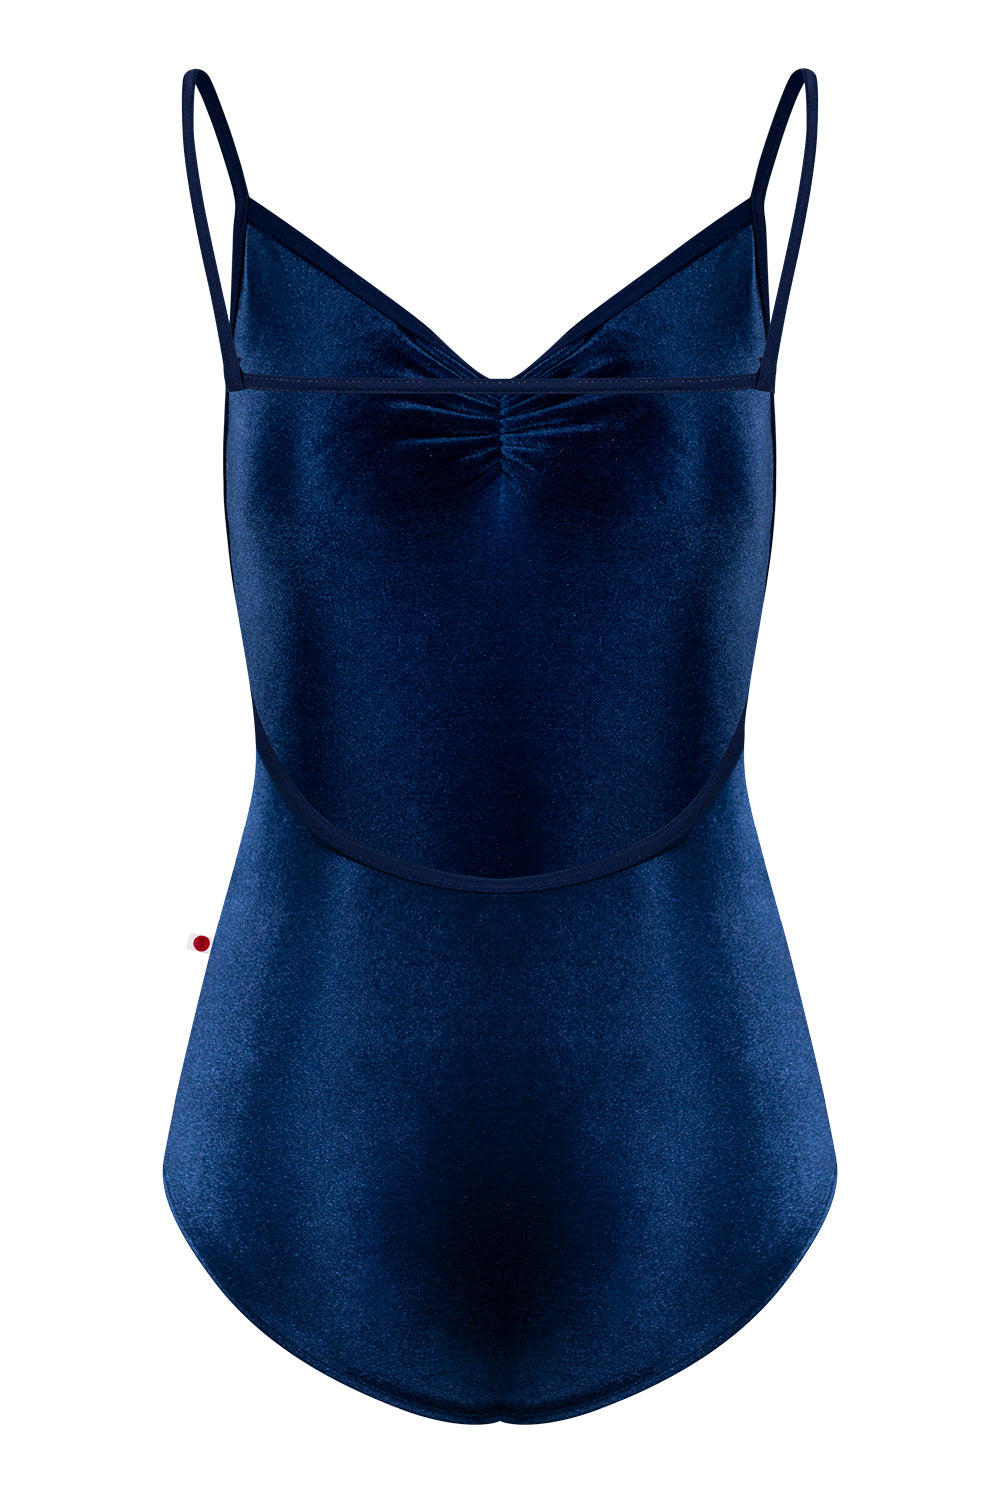 Tamara leotard in V-Pisces body color with T-Cosmo trim color and pinched front